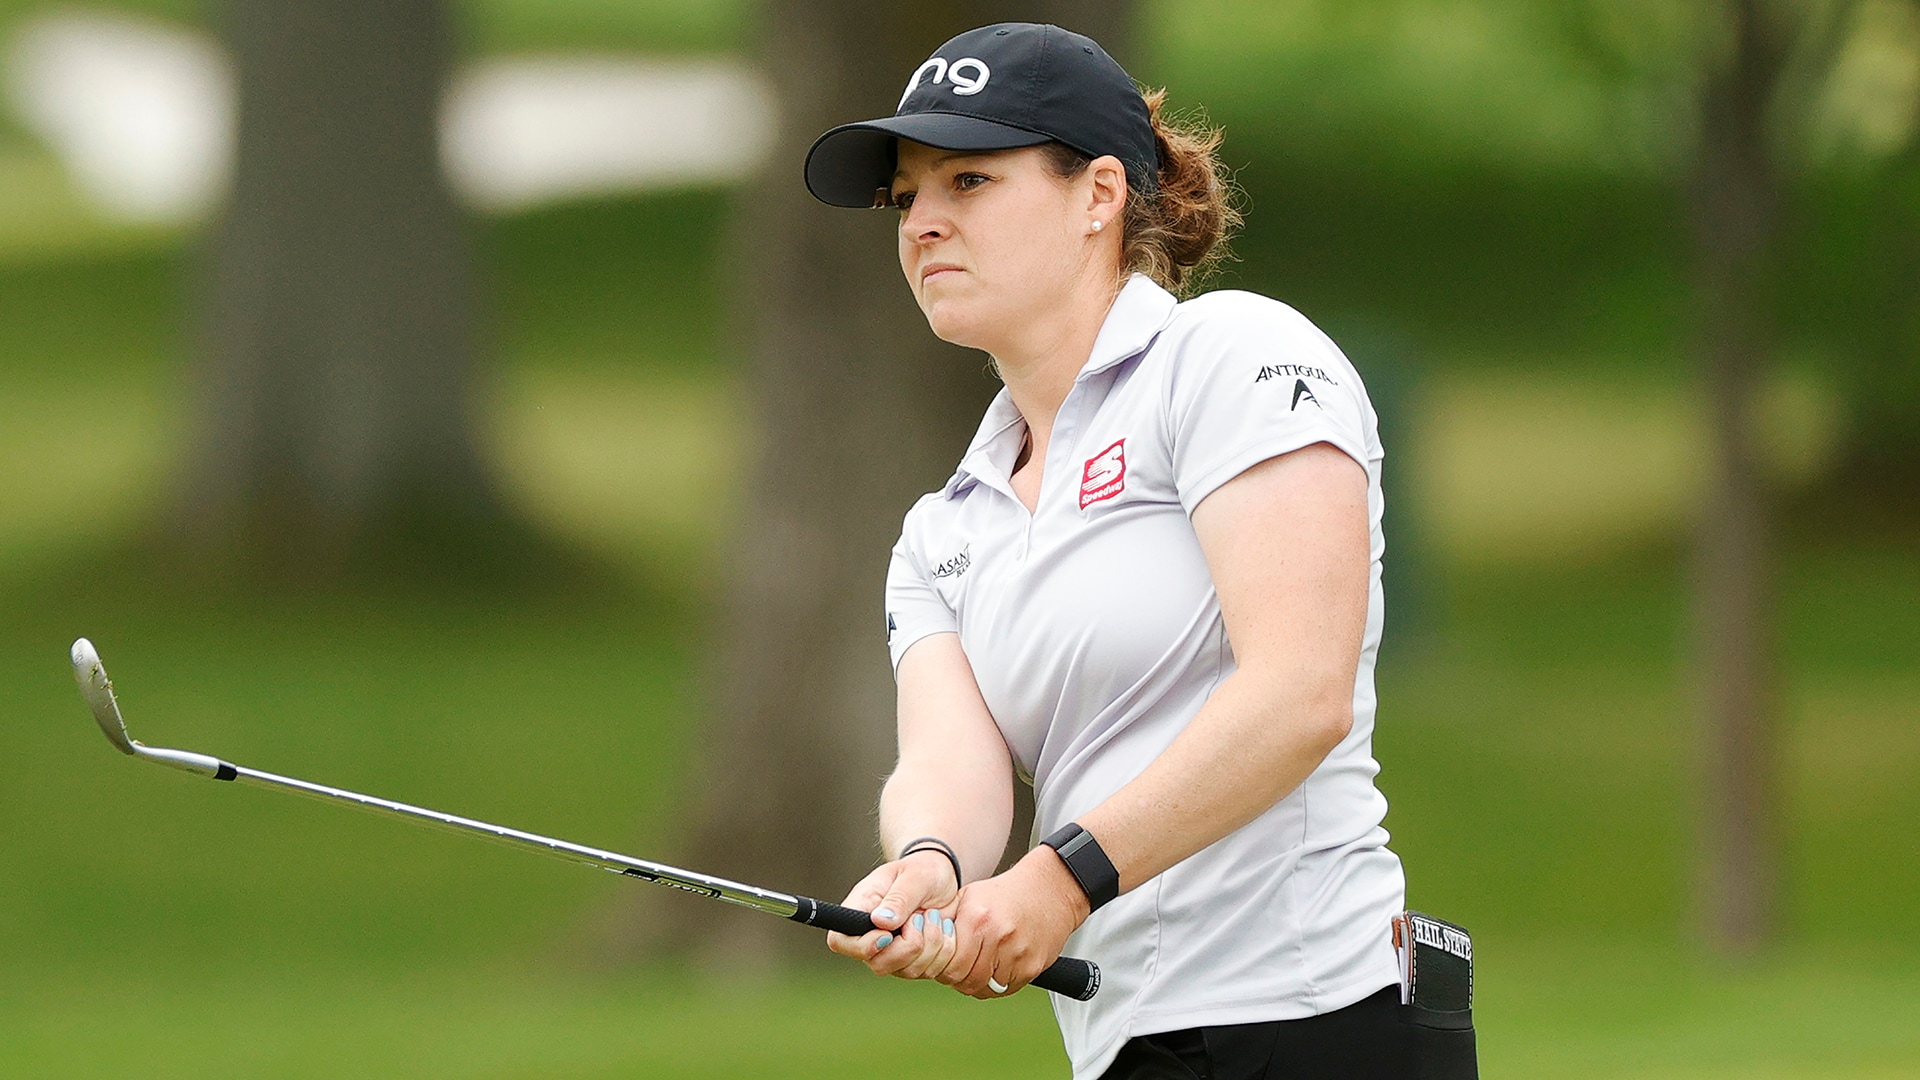 As Ally Ewing chases LPGA titles, her husband leads her alma mater to nationals